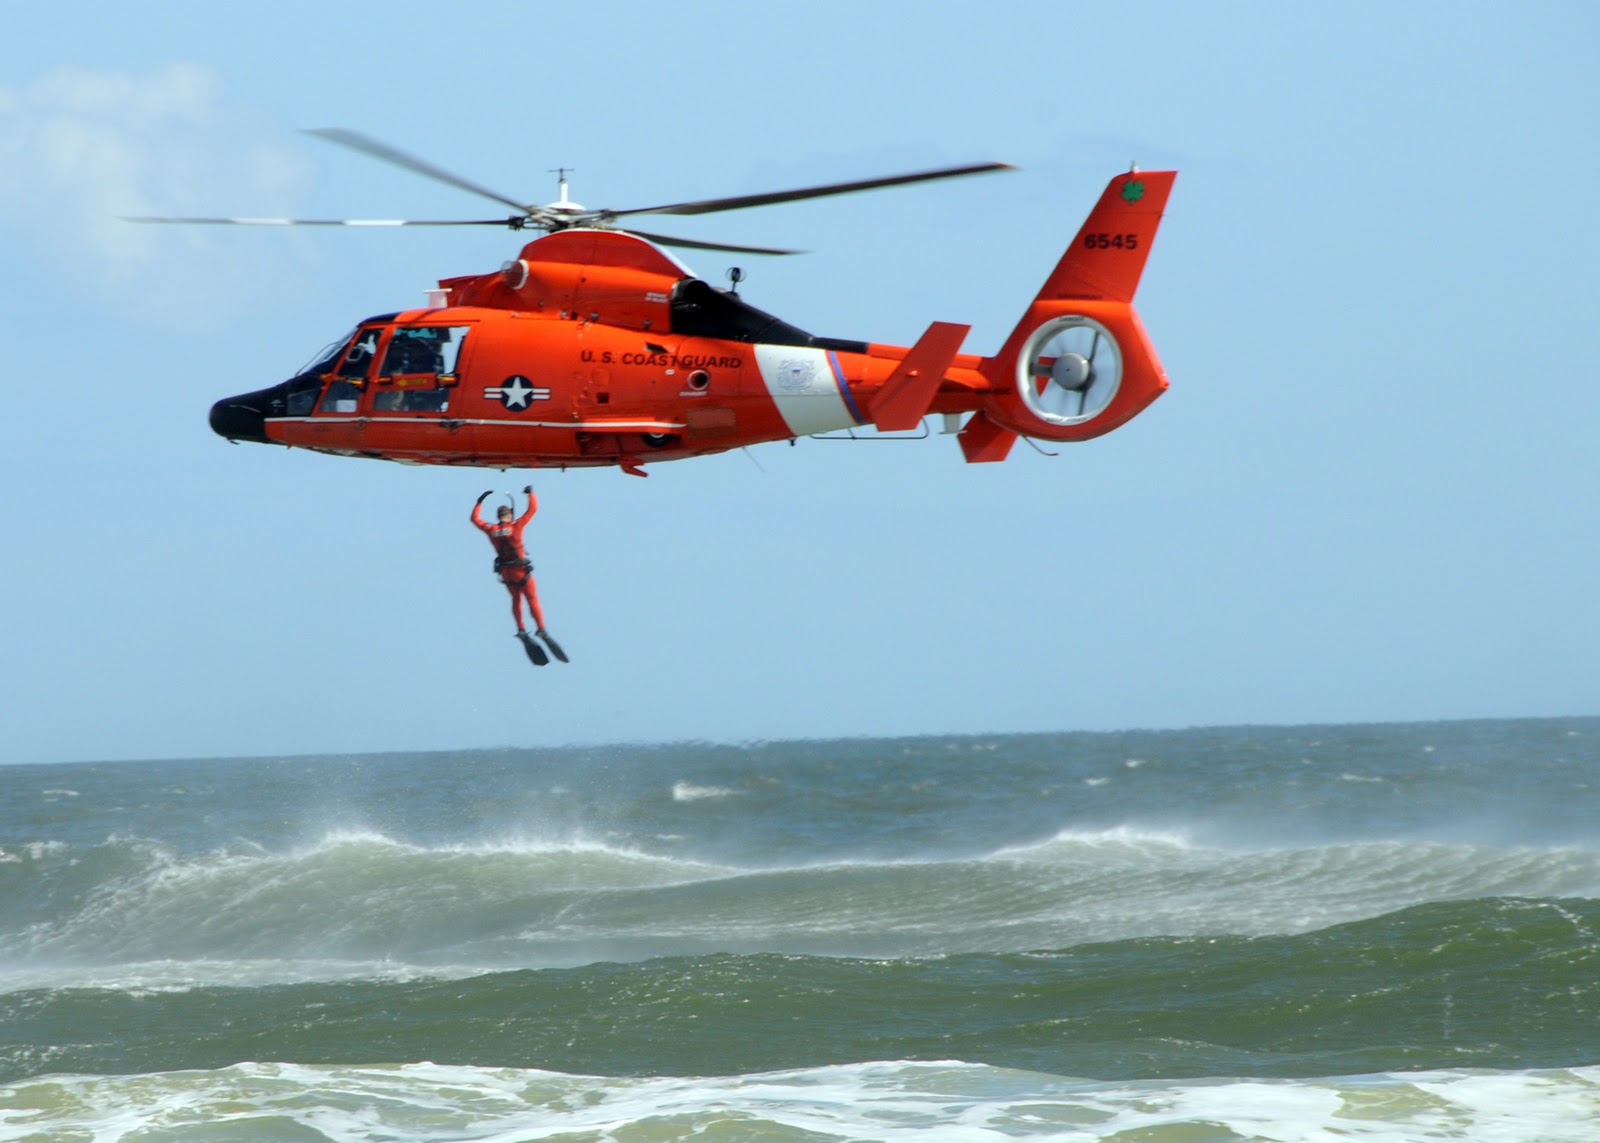 US_Navy_091108-N-5812W-004_The_U.S._Coast_Guard_demonstrates_how_they_conduct_a_search_and_rescue_during_the_2009_Sea_and_Sky_Spectacular.jpg